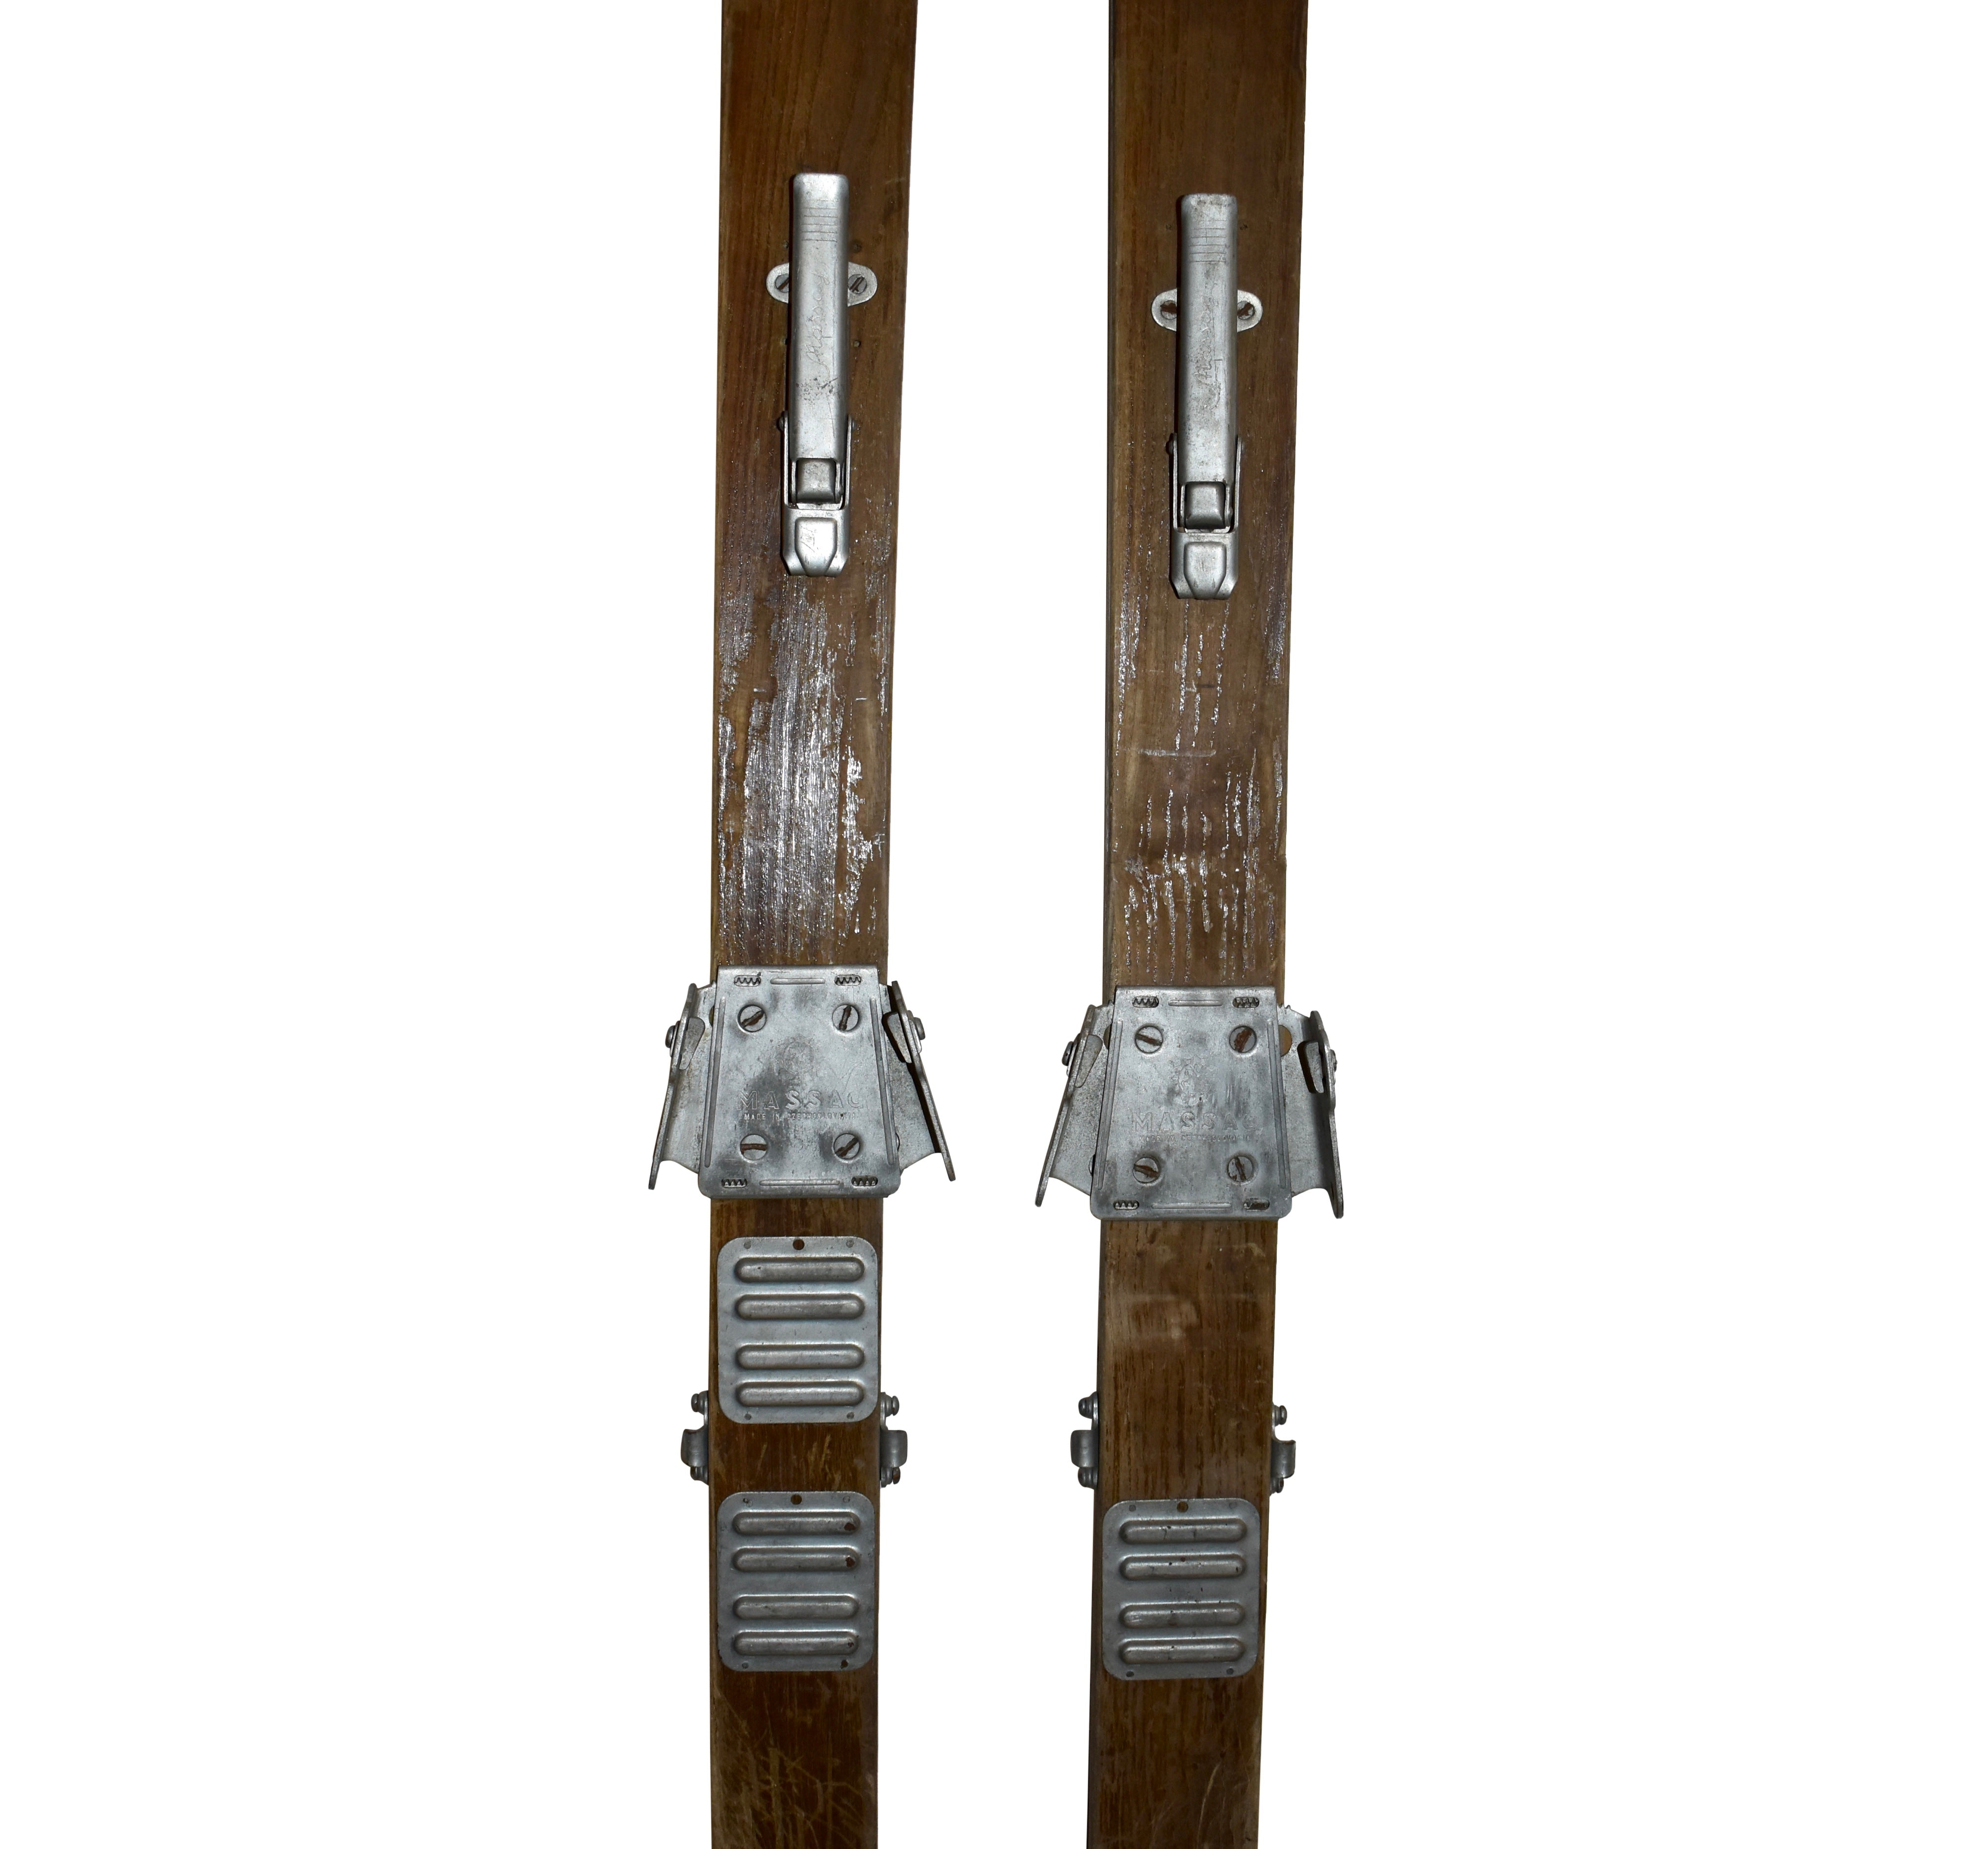 Wooden Skis with Massag Bindings